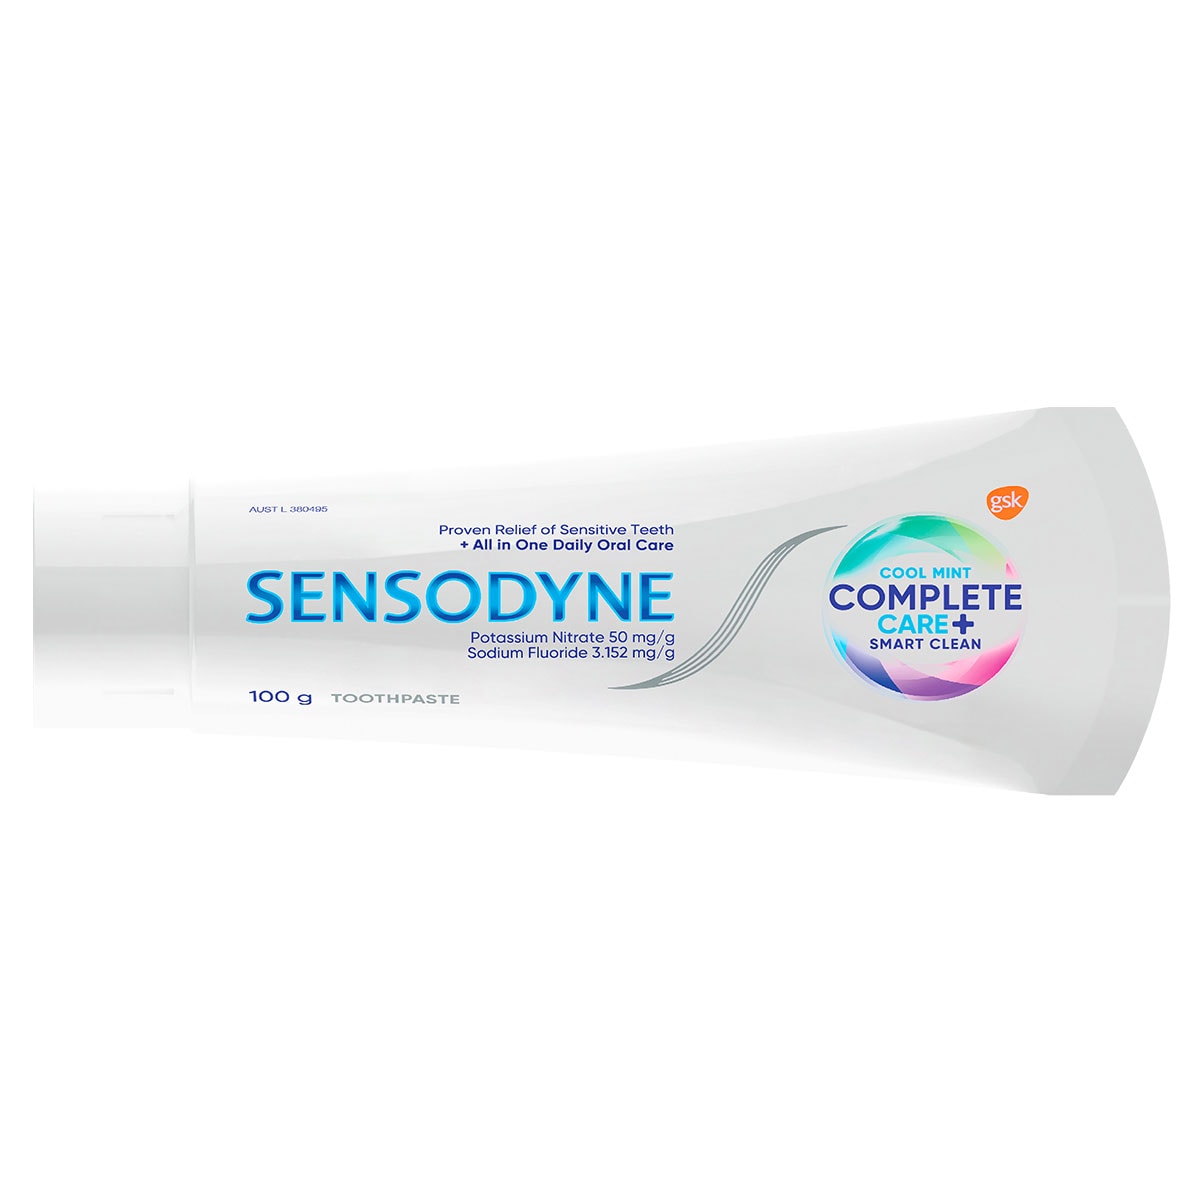 Sensodyne Complete Care + Smart Clean Toothpaste Cool Mint 100g